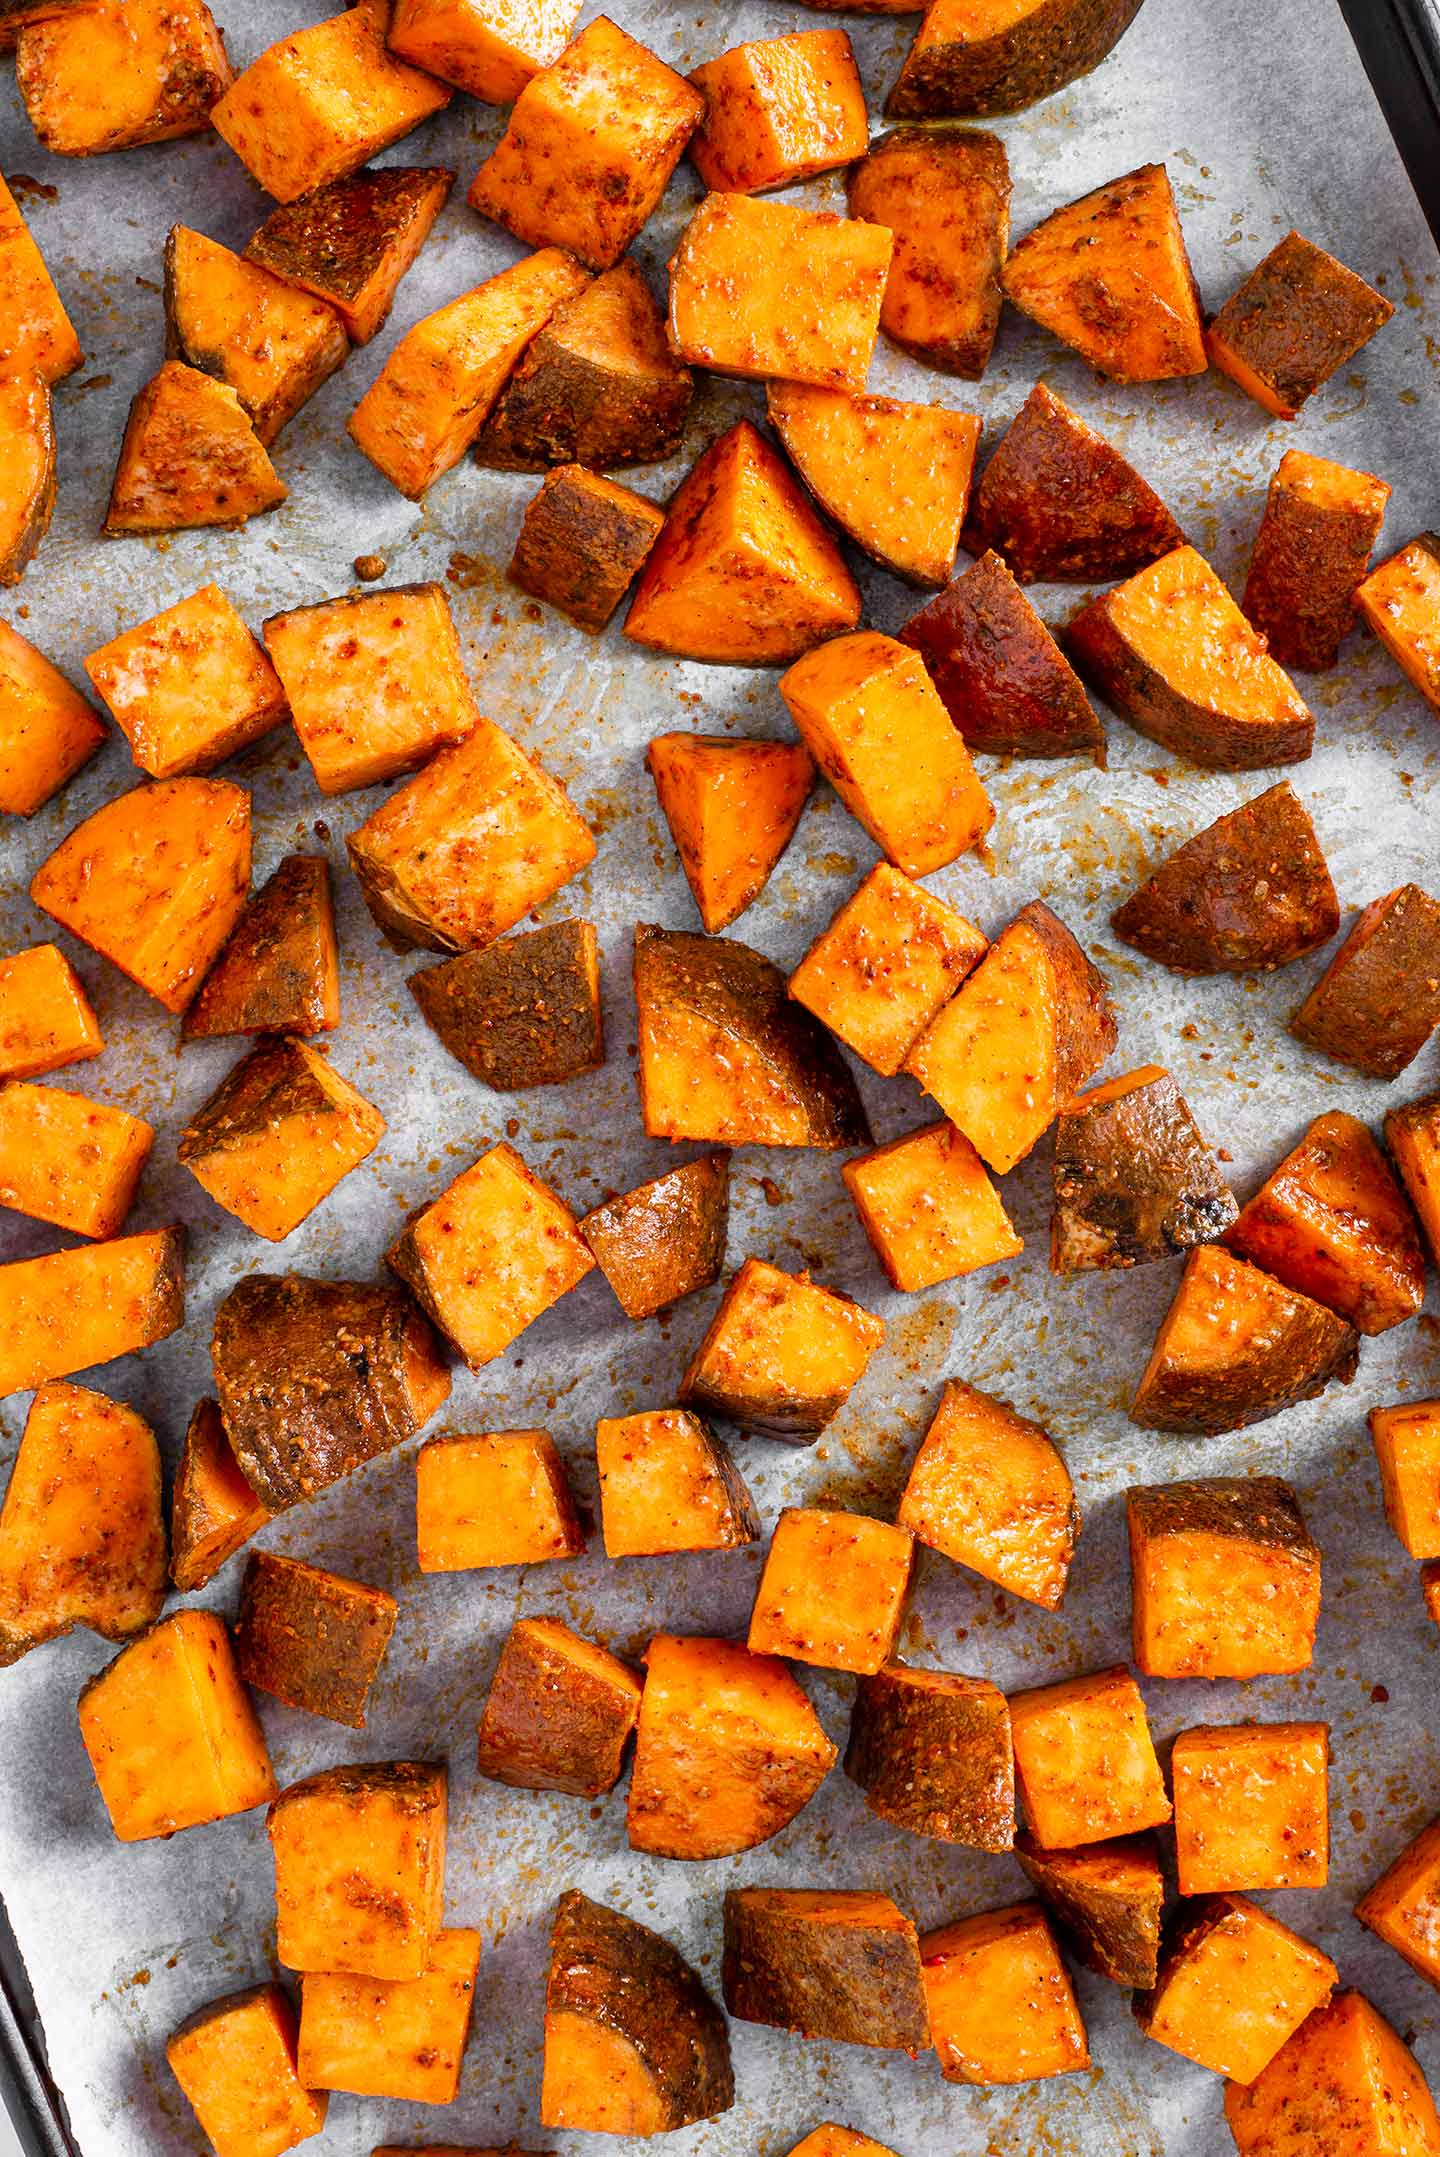 Top down view of sweet potato cubes scattered on a parchment lined baking tray.